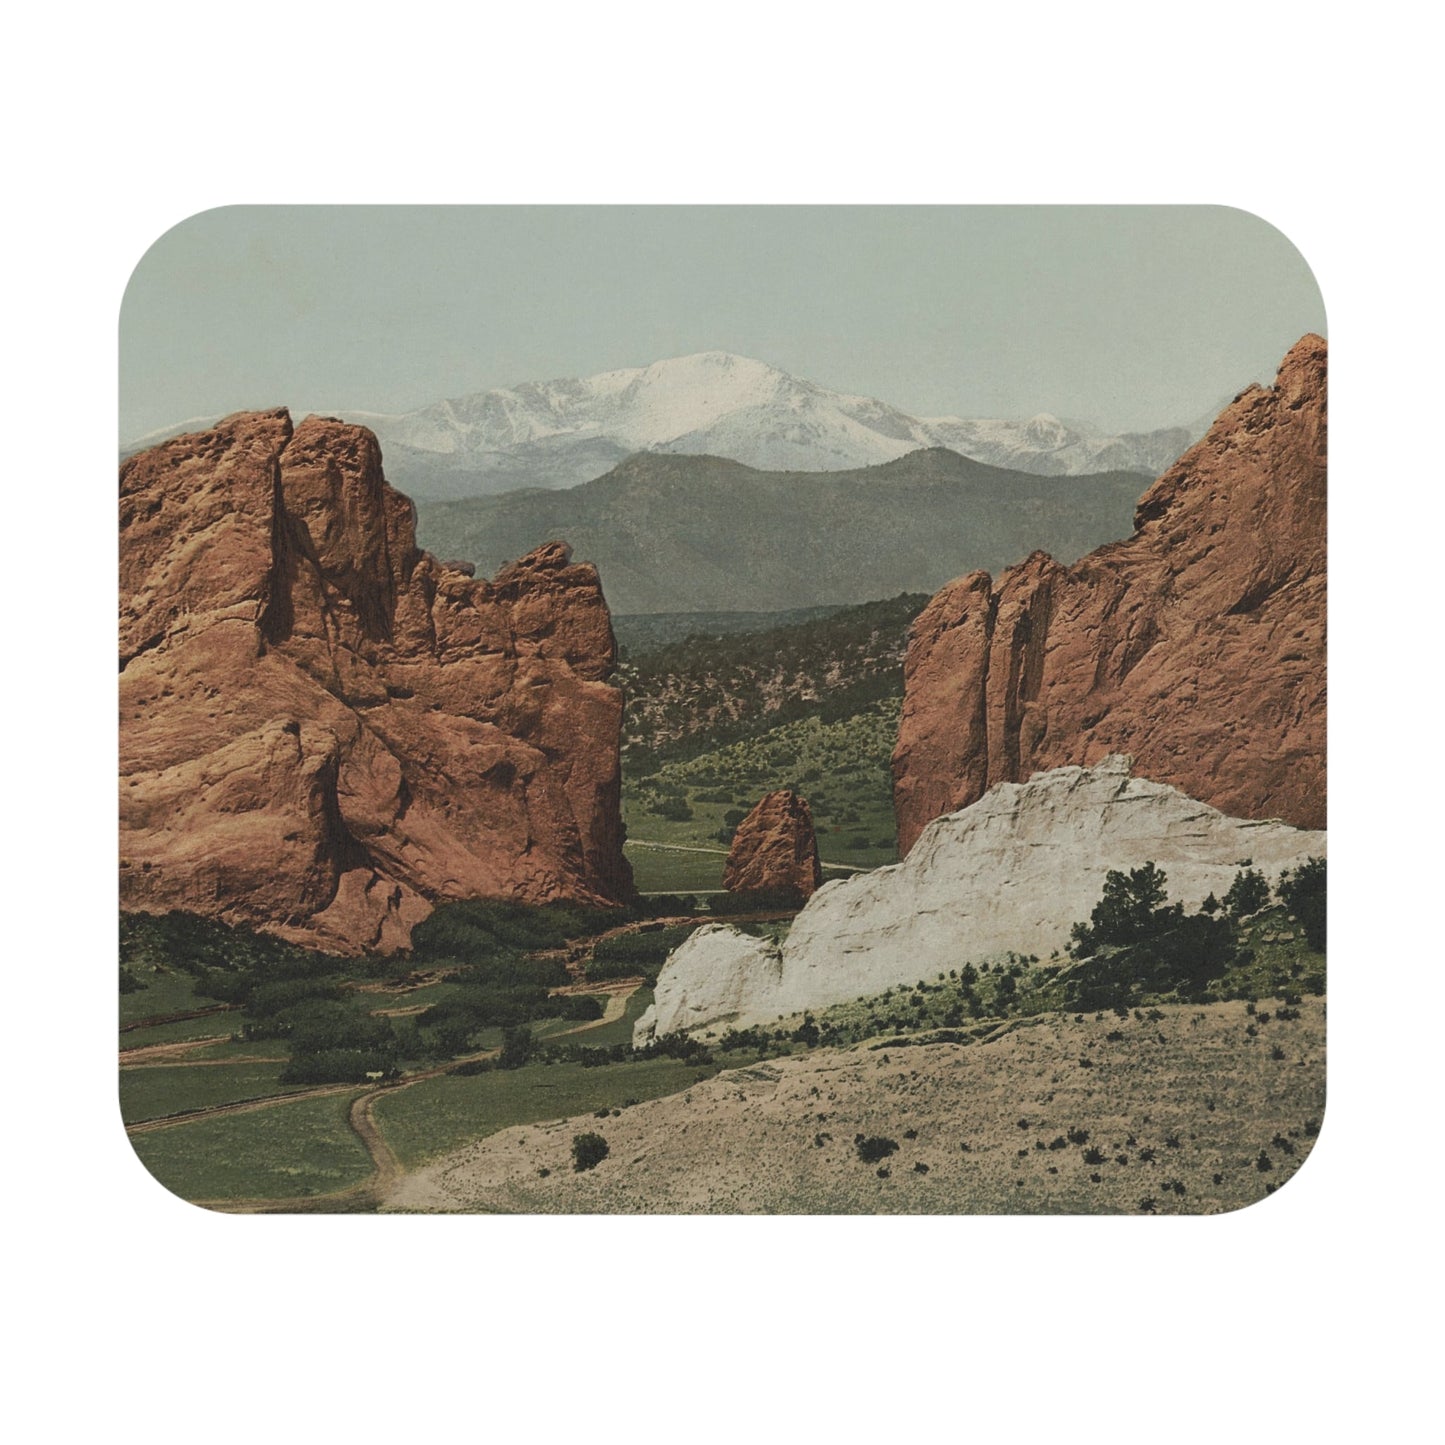 The Gateway Mouse Pad with Garden of the Gods inspired design, desk and office decor showcasing stunning natural rock formations.